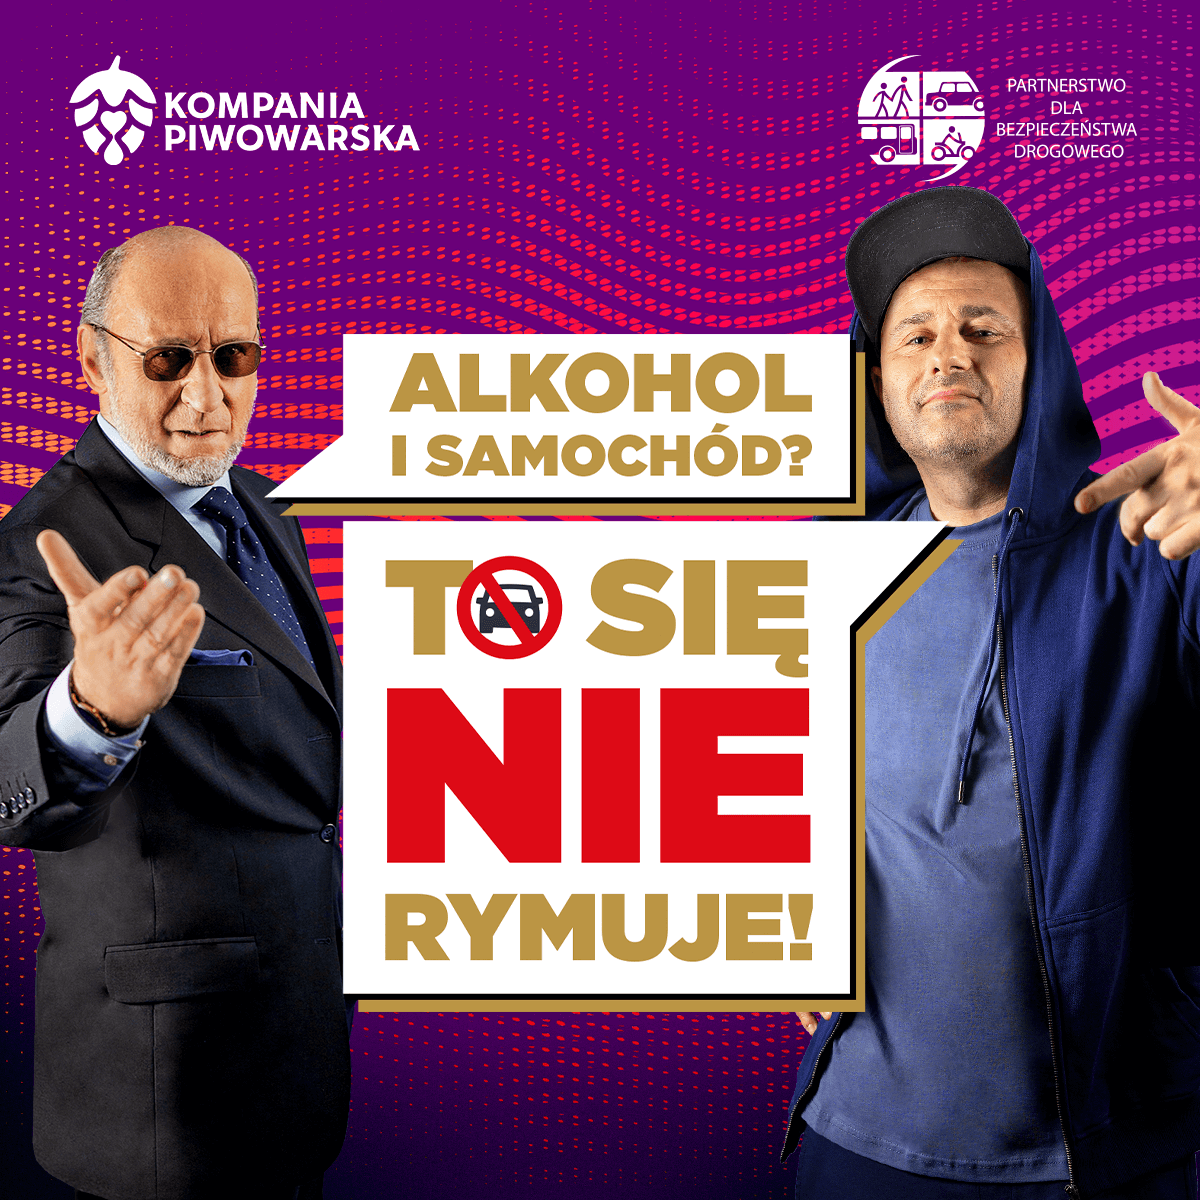 “Alcohol and car? That doesn’t rhyme!” – Piotr Fronczewski and Pih have recorded a song exclusively for Kompania Piwowarska’s musical social campaign